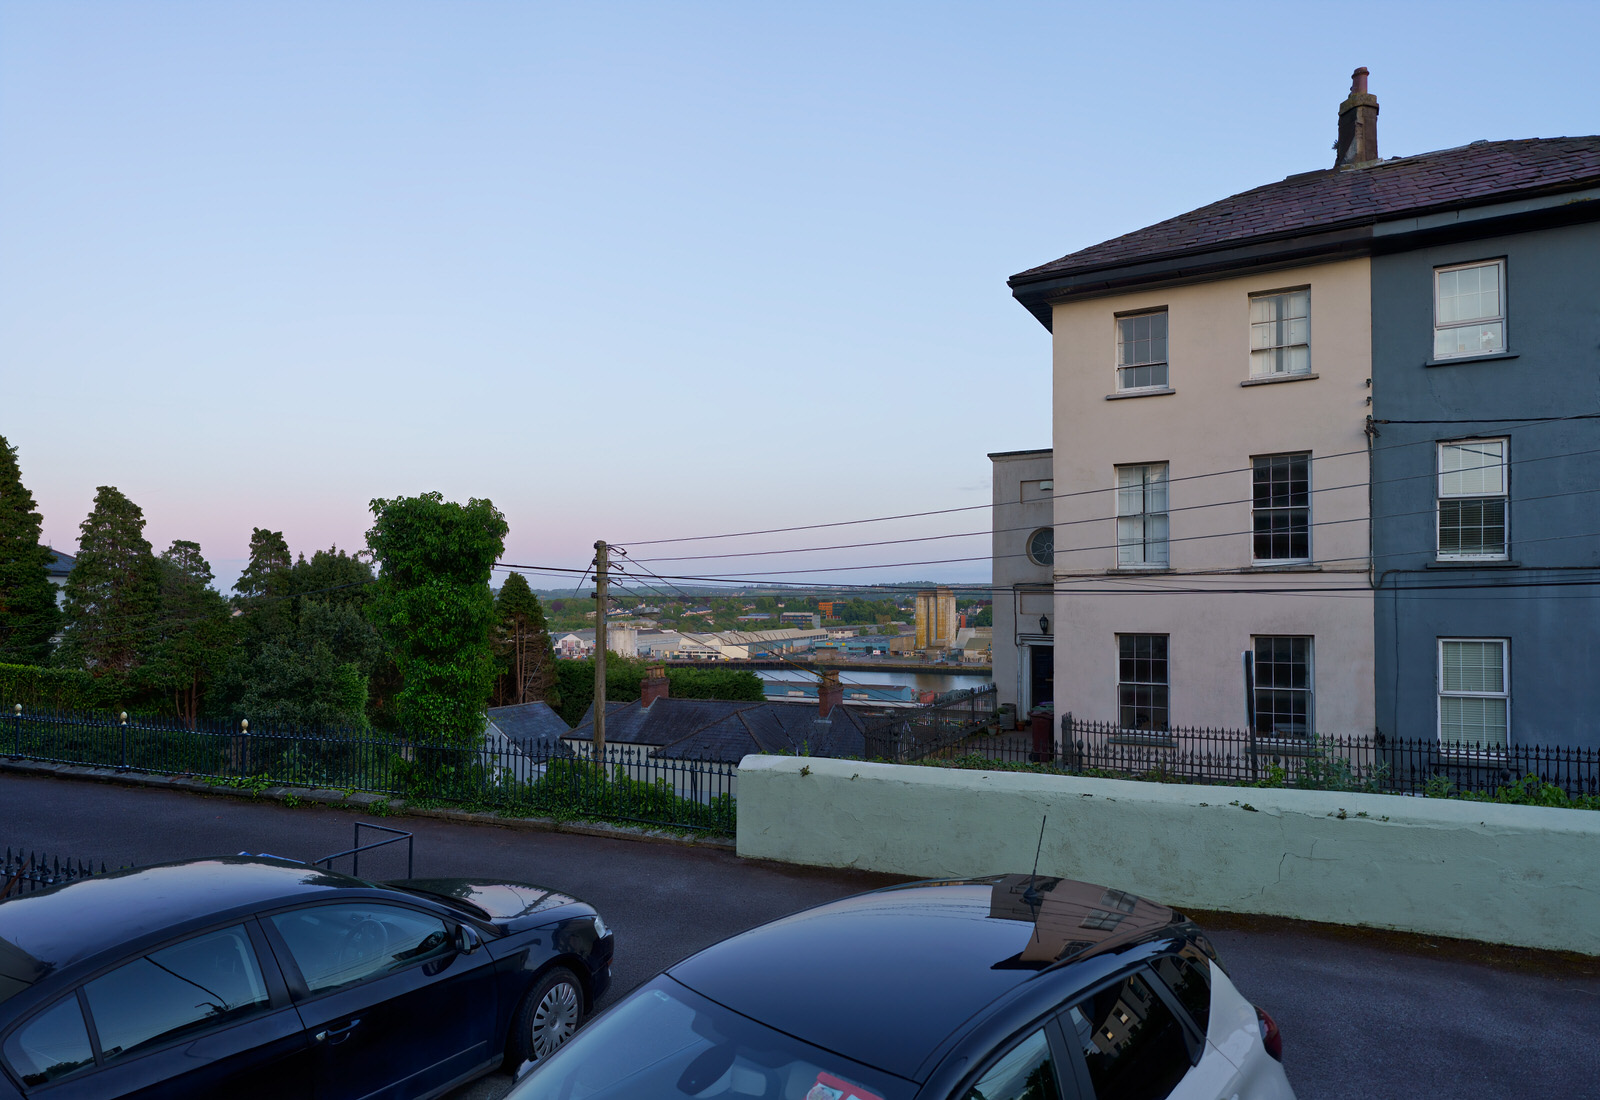 WHERE IS GABRIELLE HOUSE ON SUMMERHILL NORTH [IN CORK EVERYWHERE IS UPHILL] 005